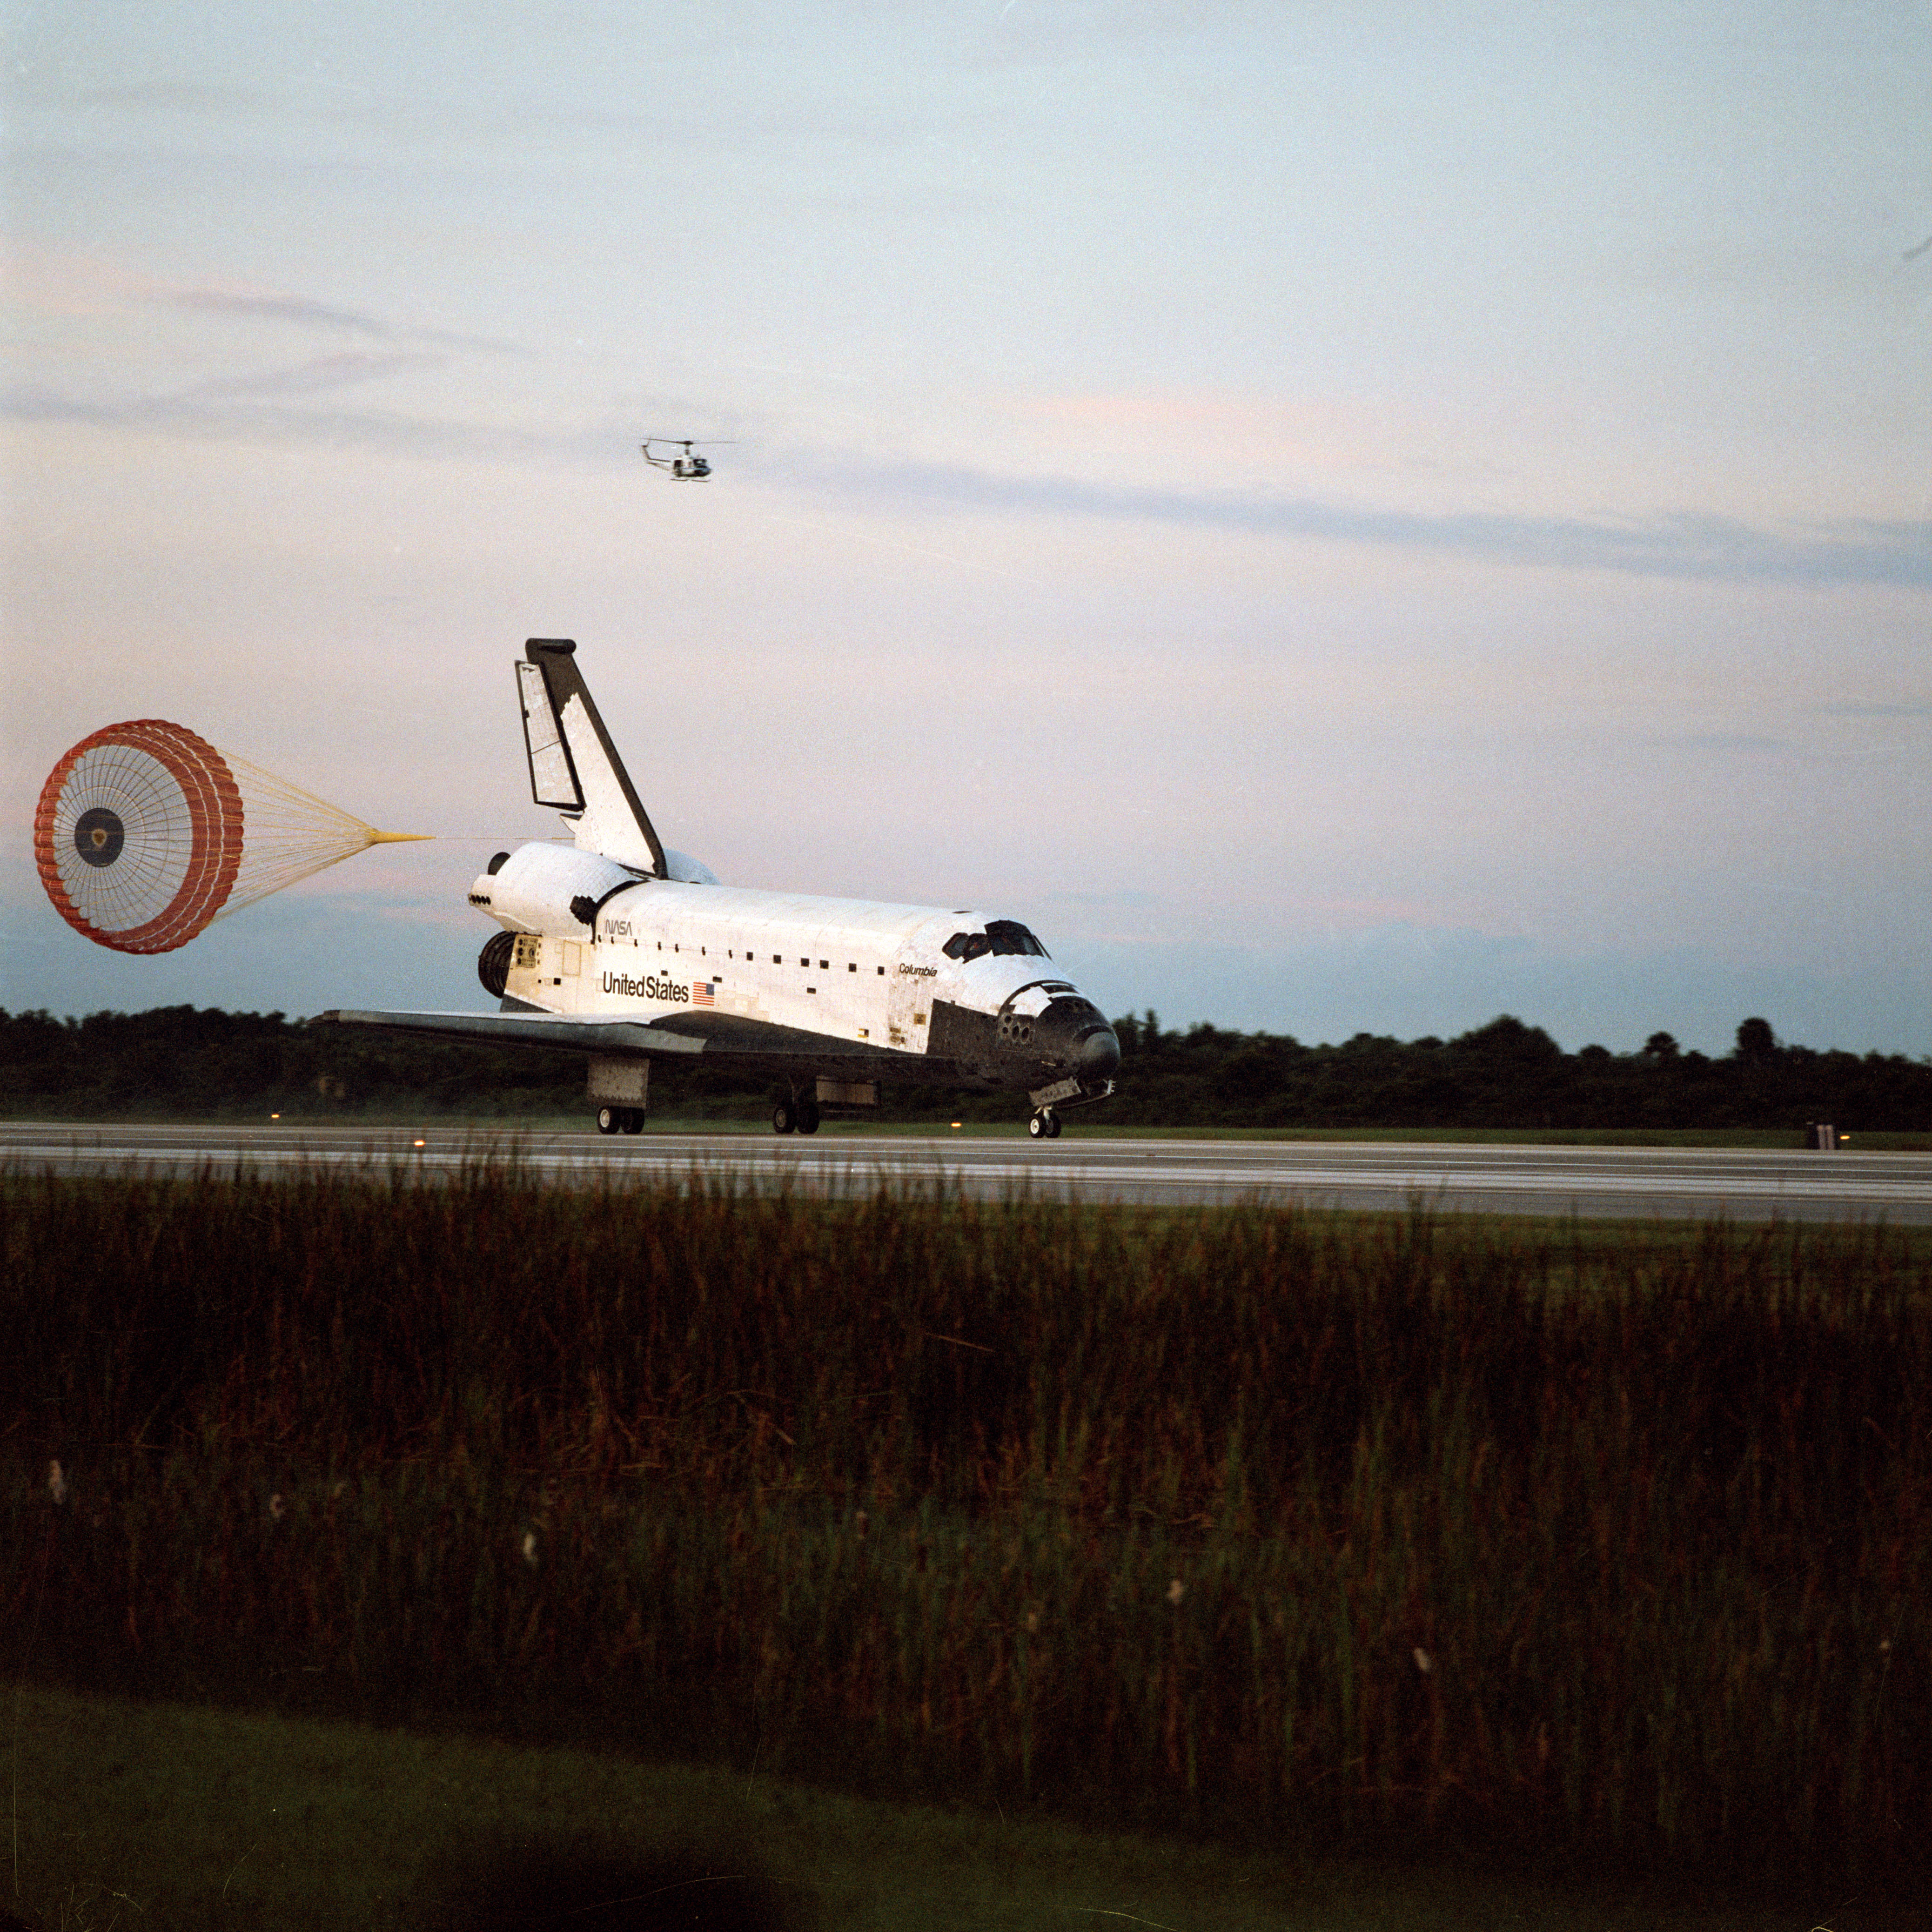 Columbia touches down on KSC's Shuttle Landing Facility to end the STS-65 mission